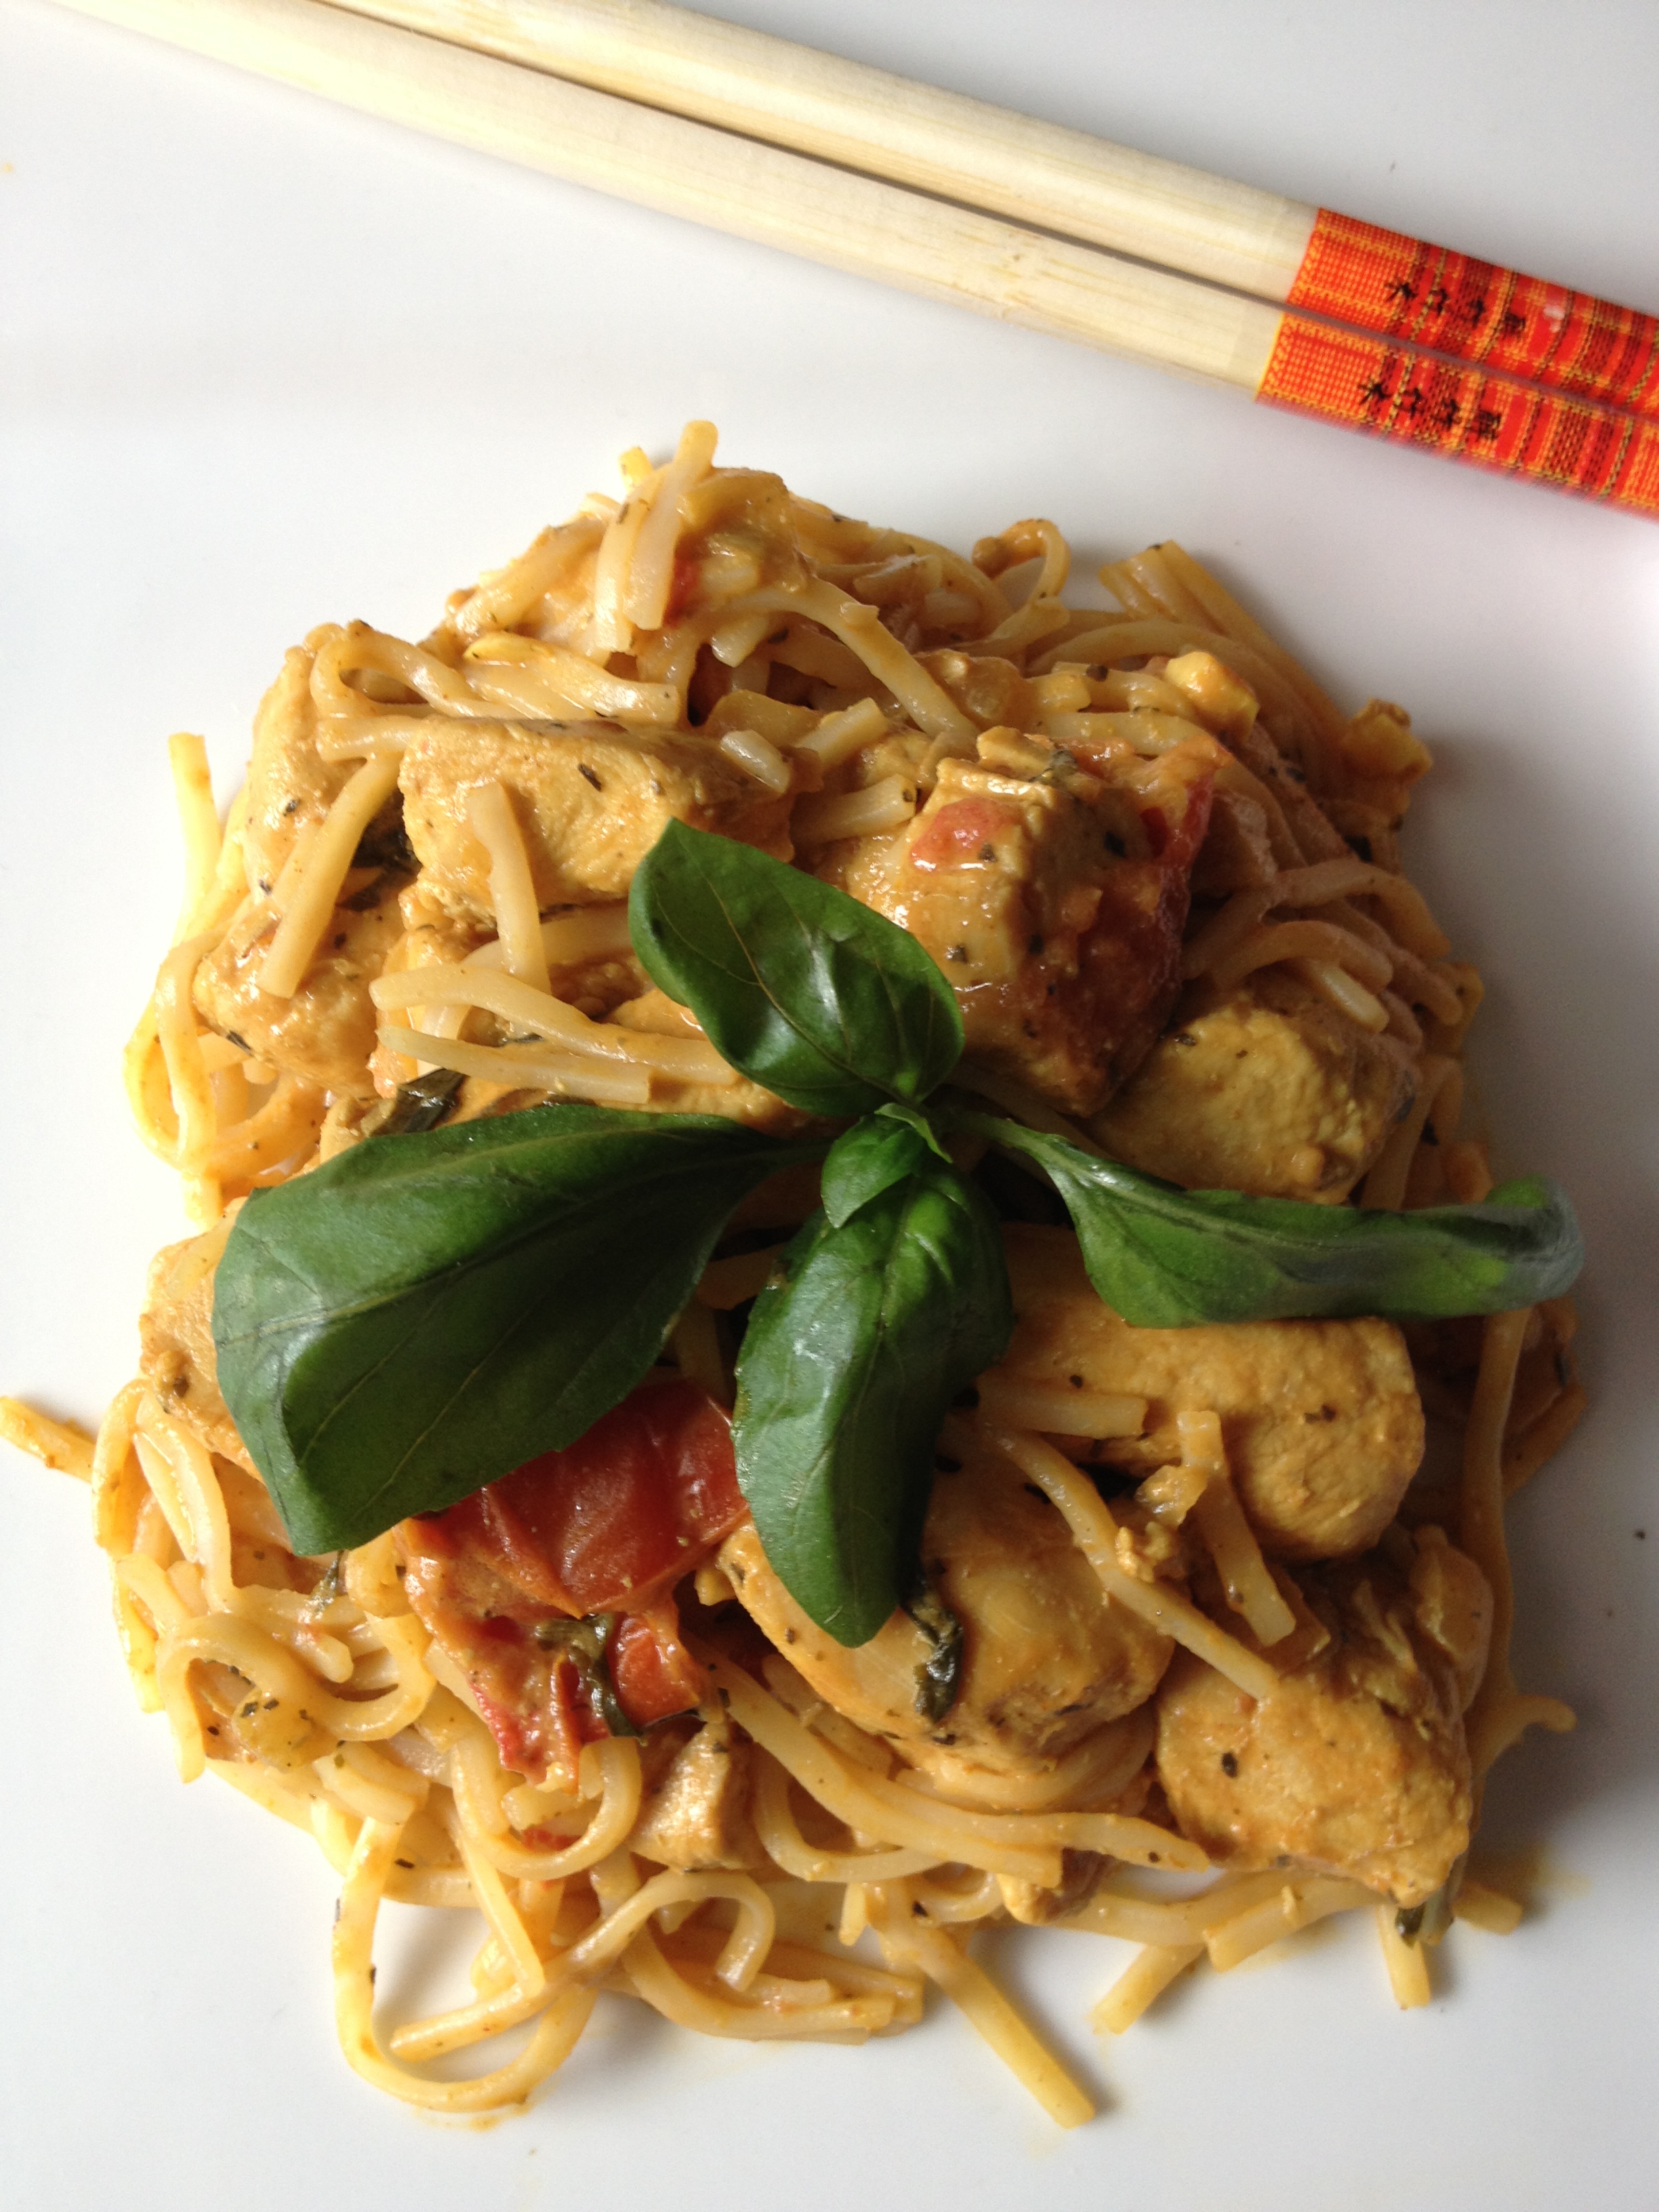 Thai chicken curry with coconut milk, peanut sauce, plum tomatoes, and fresh basil